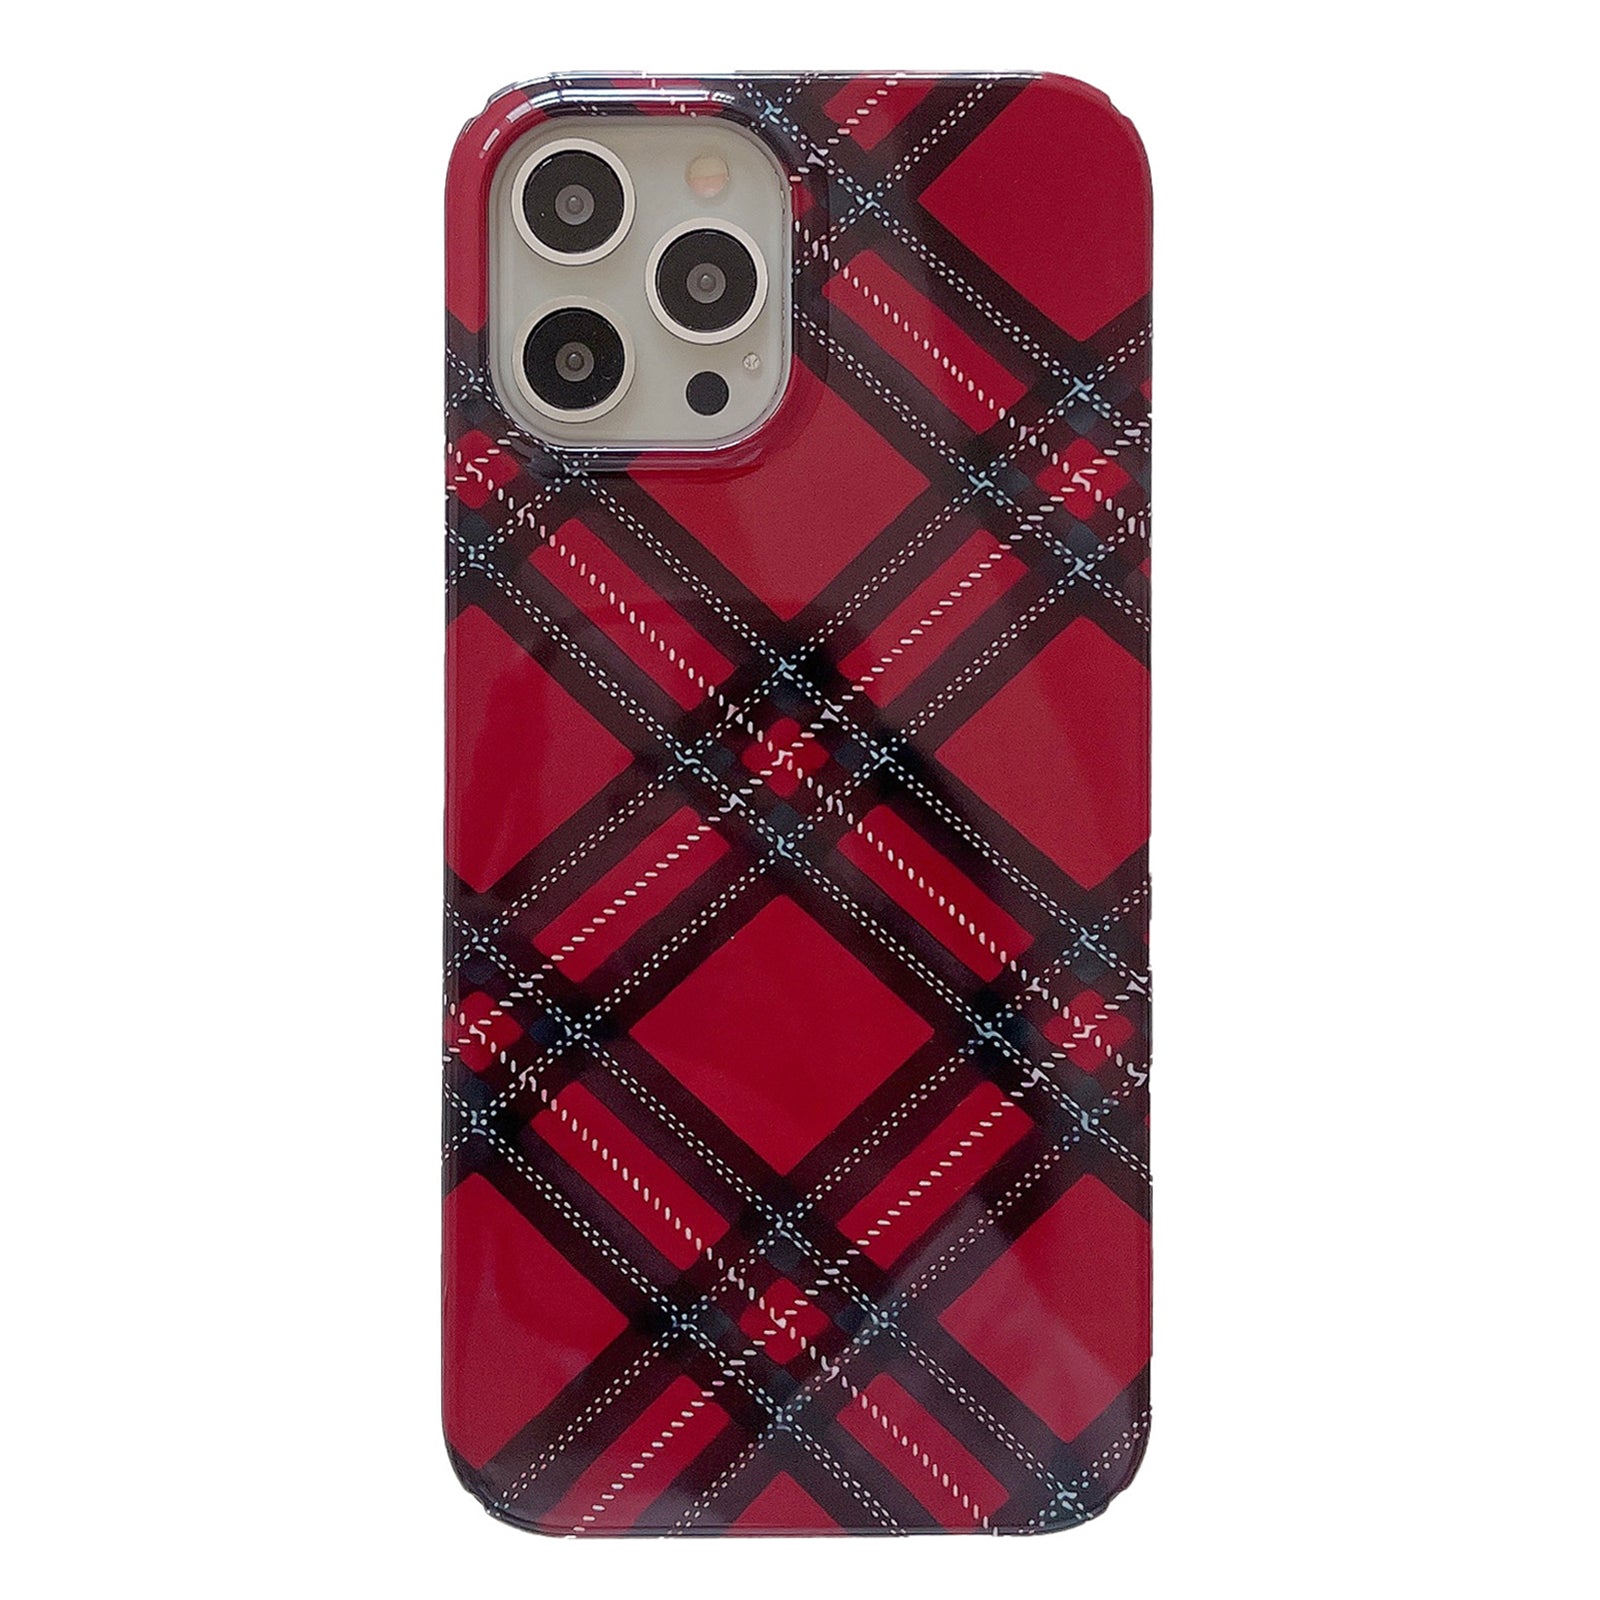 Uniqkart for iPhone 12 Pro Max 6.7 inch Hard PC Phone Case Pattern Printing Protective Glossy Phone Shell - Red Grids